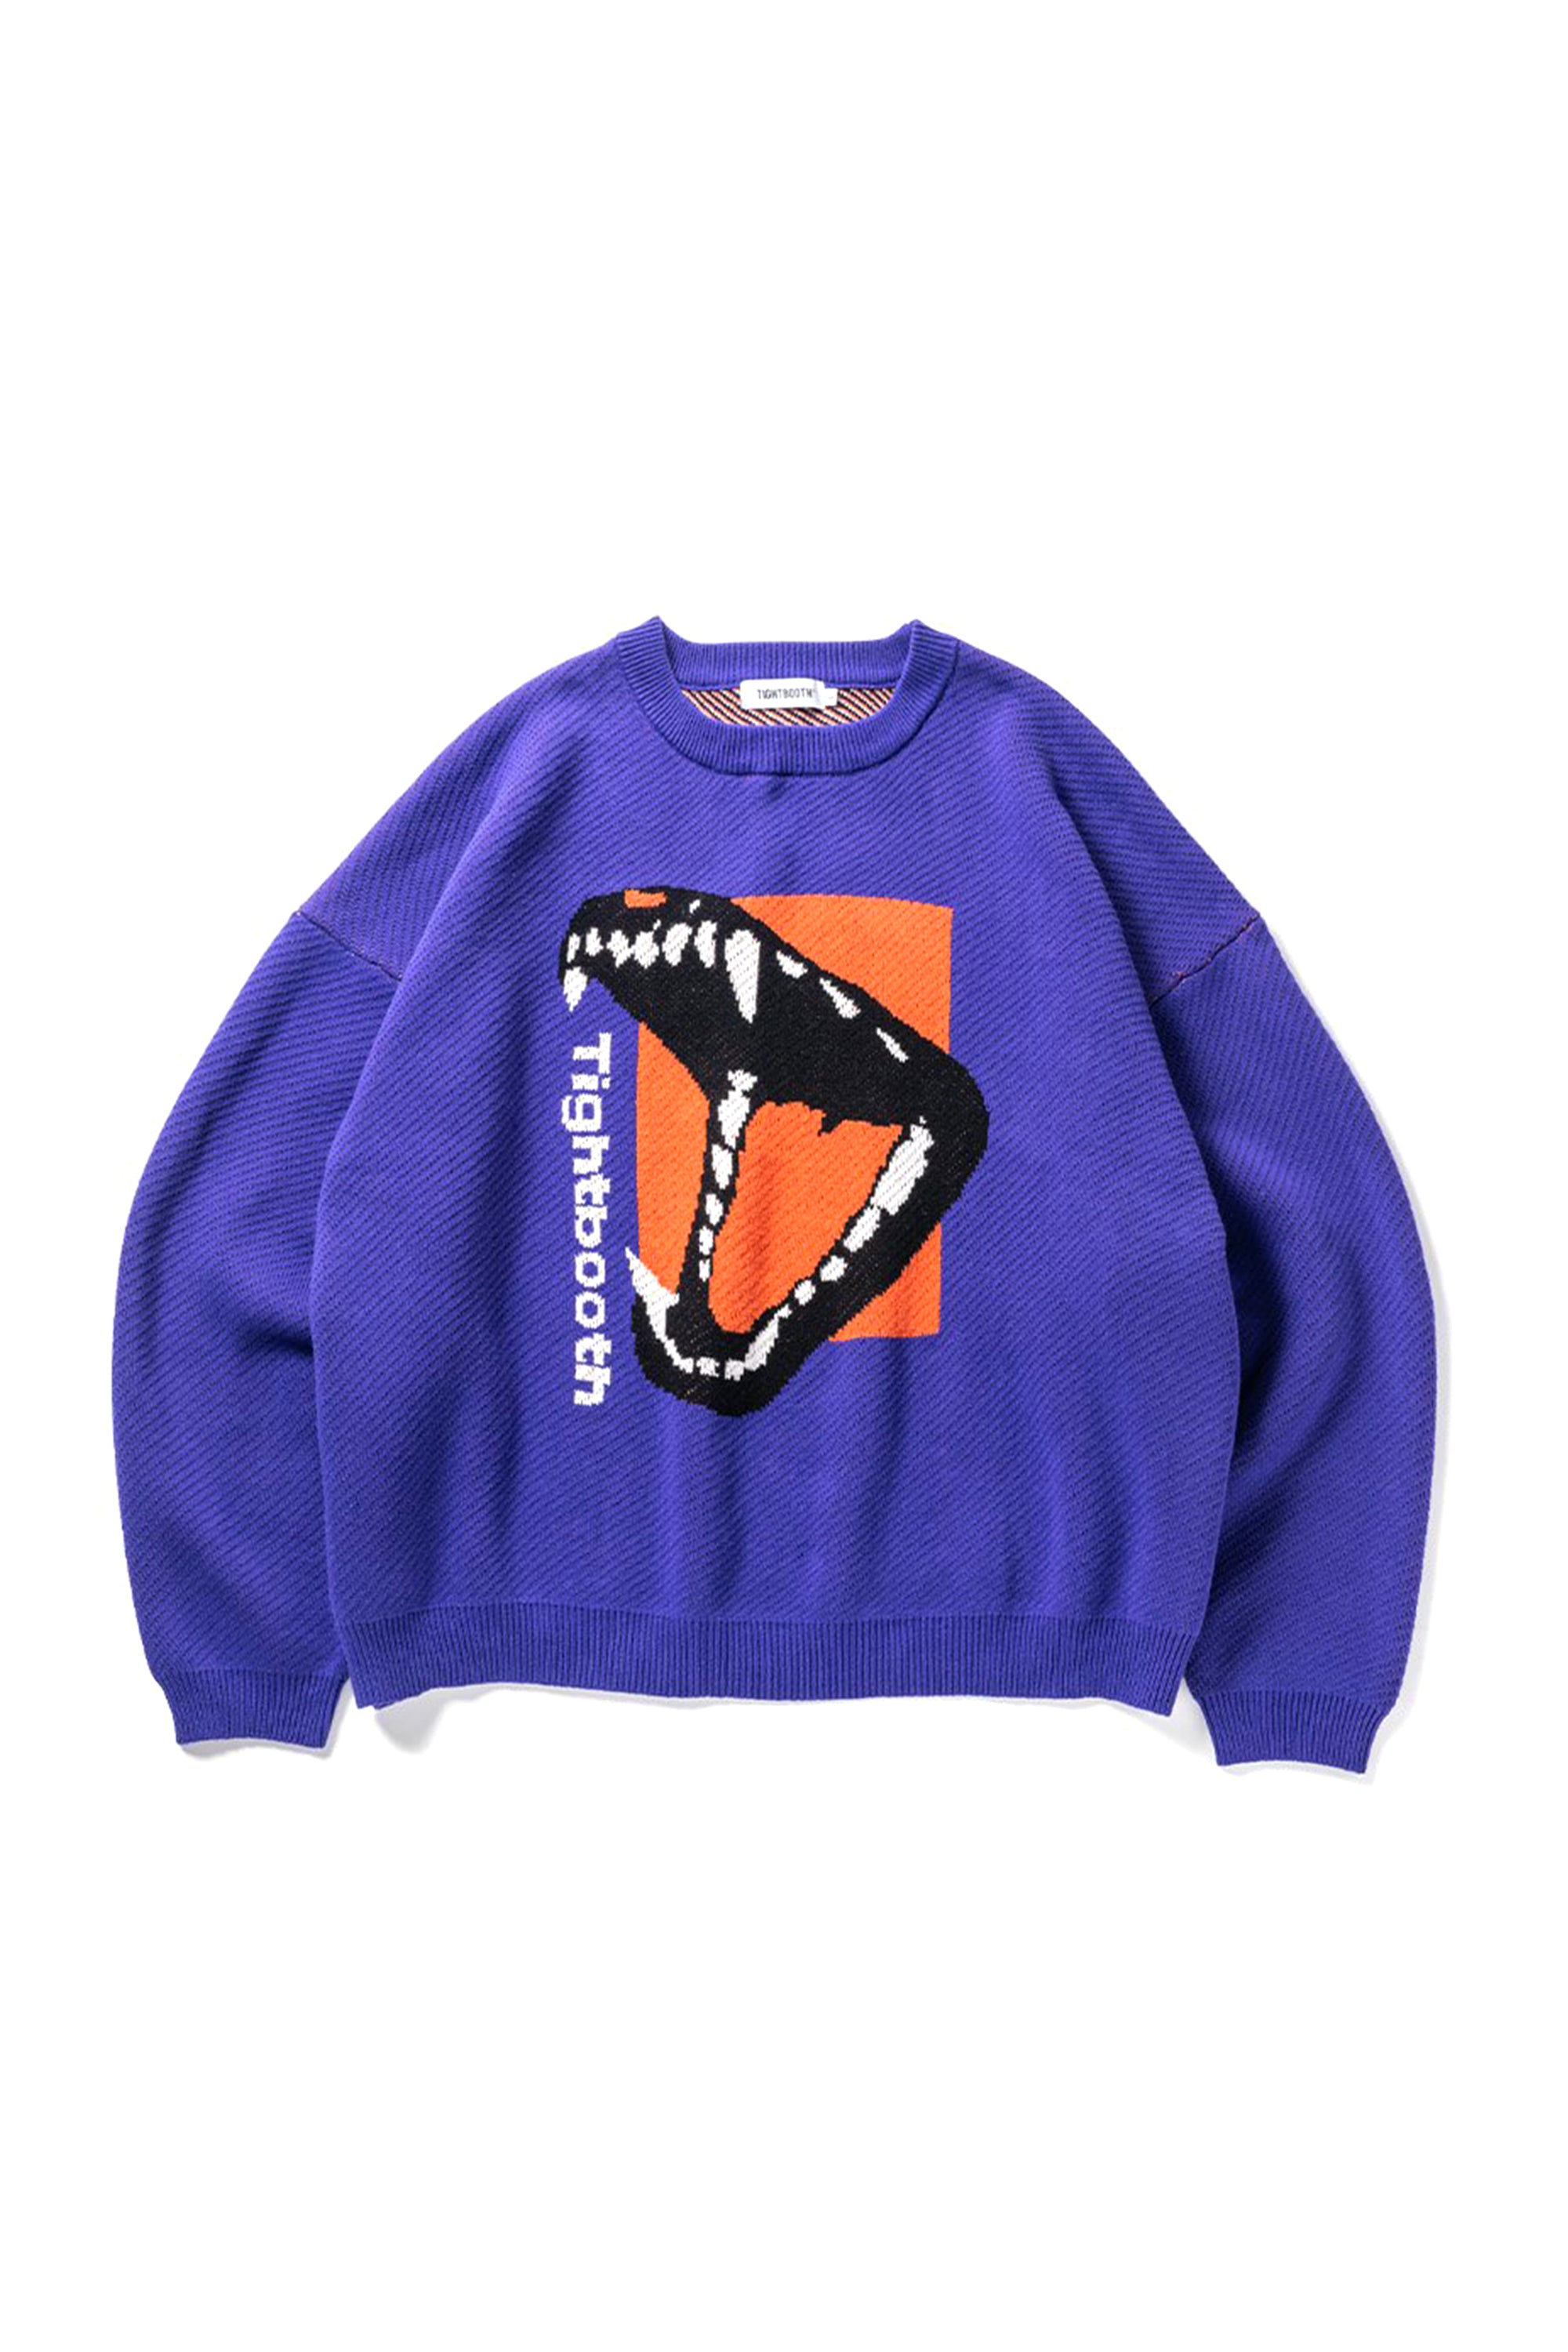 TIGHTBOOTH FW BITE KNIT SWEATER / PUR  NUBIAN